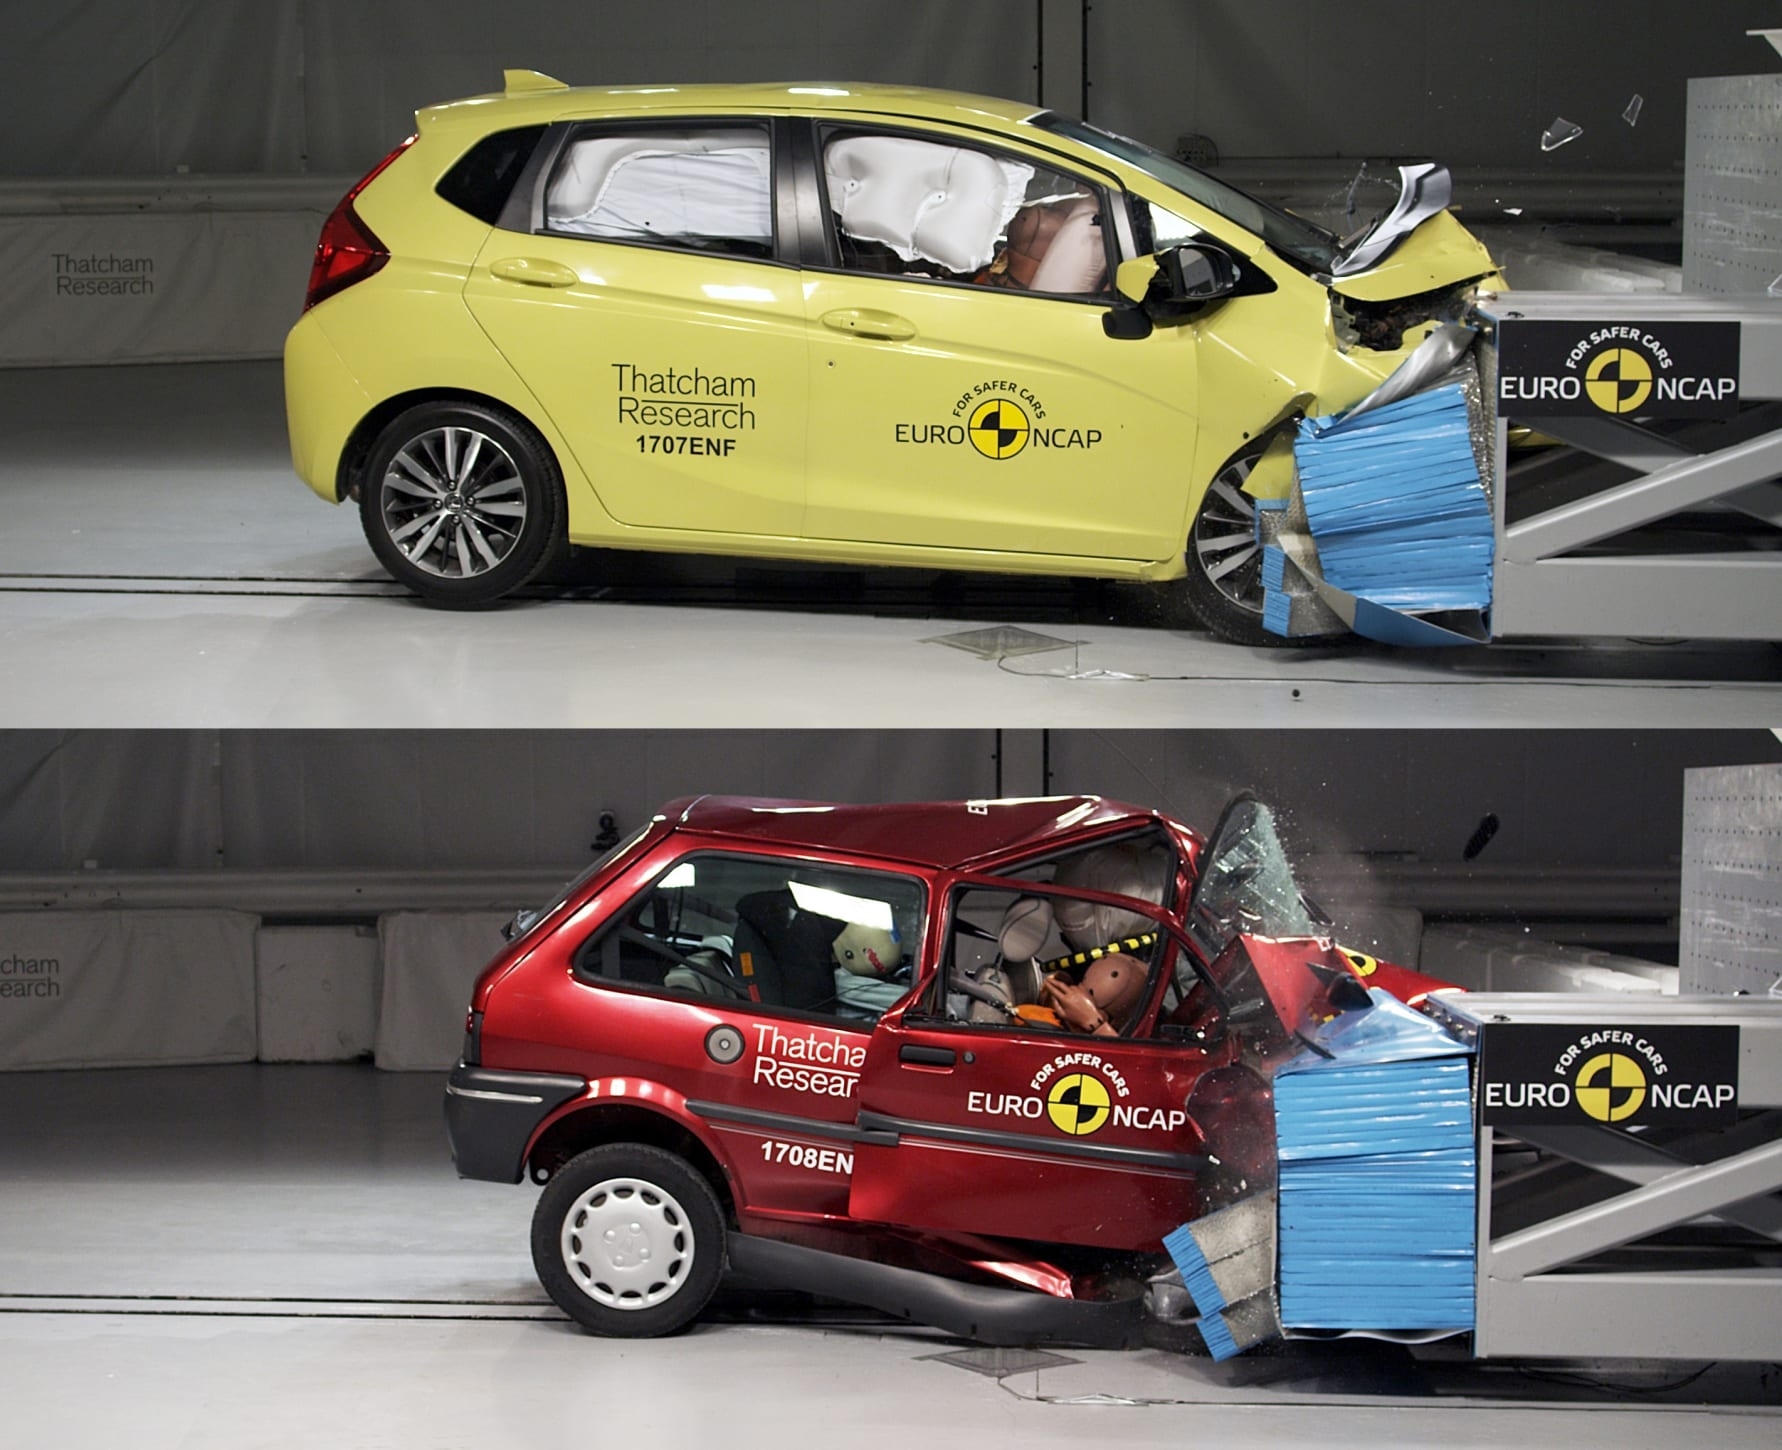 uro NCAP 20th Anniversary – Thatcham Research crash tests the 1997 Rover 100 and a current Honda Jazz, dramatizing 20 years of advances in car safety